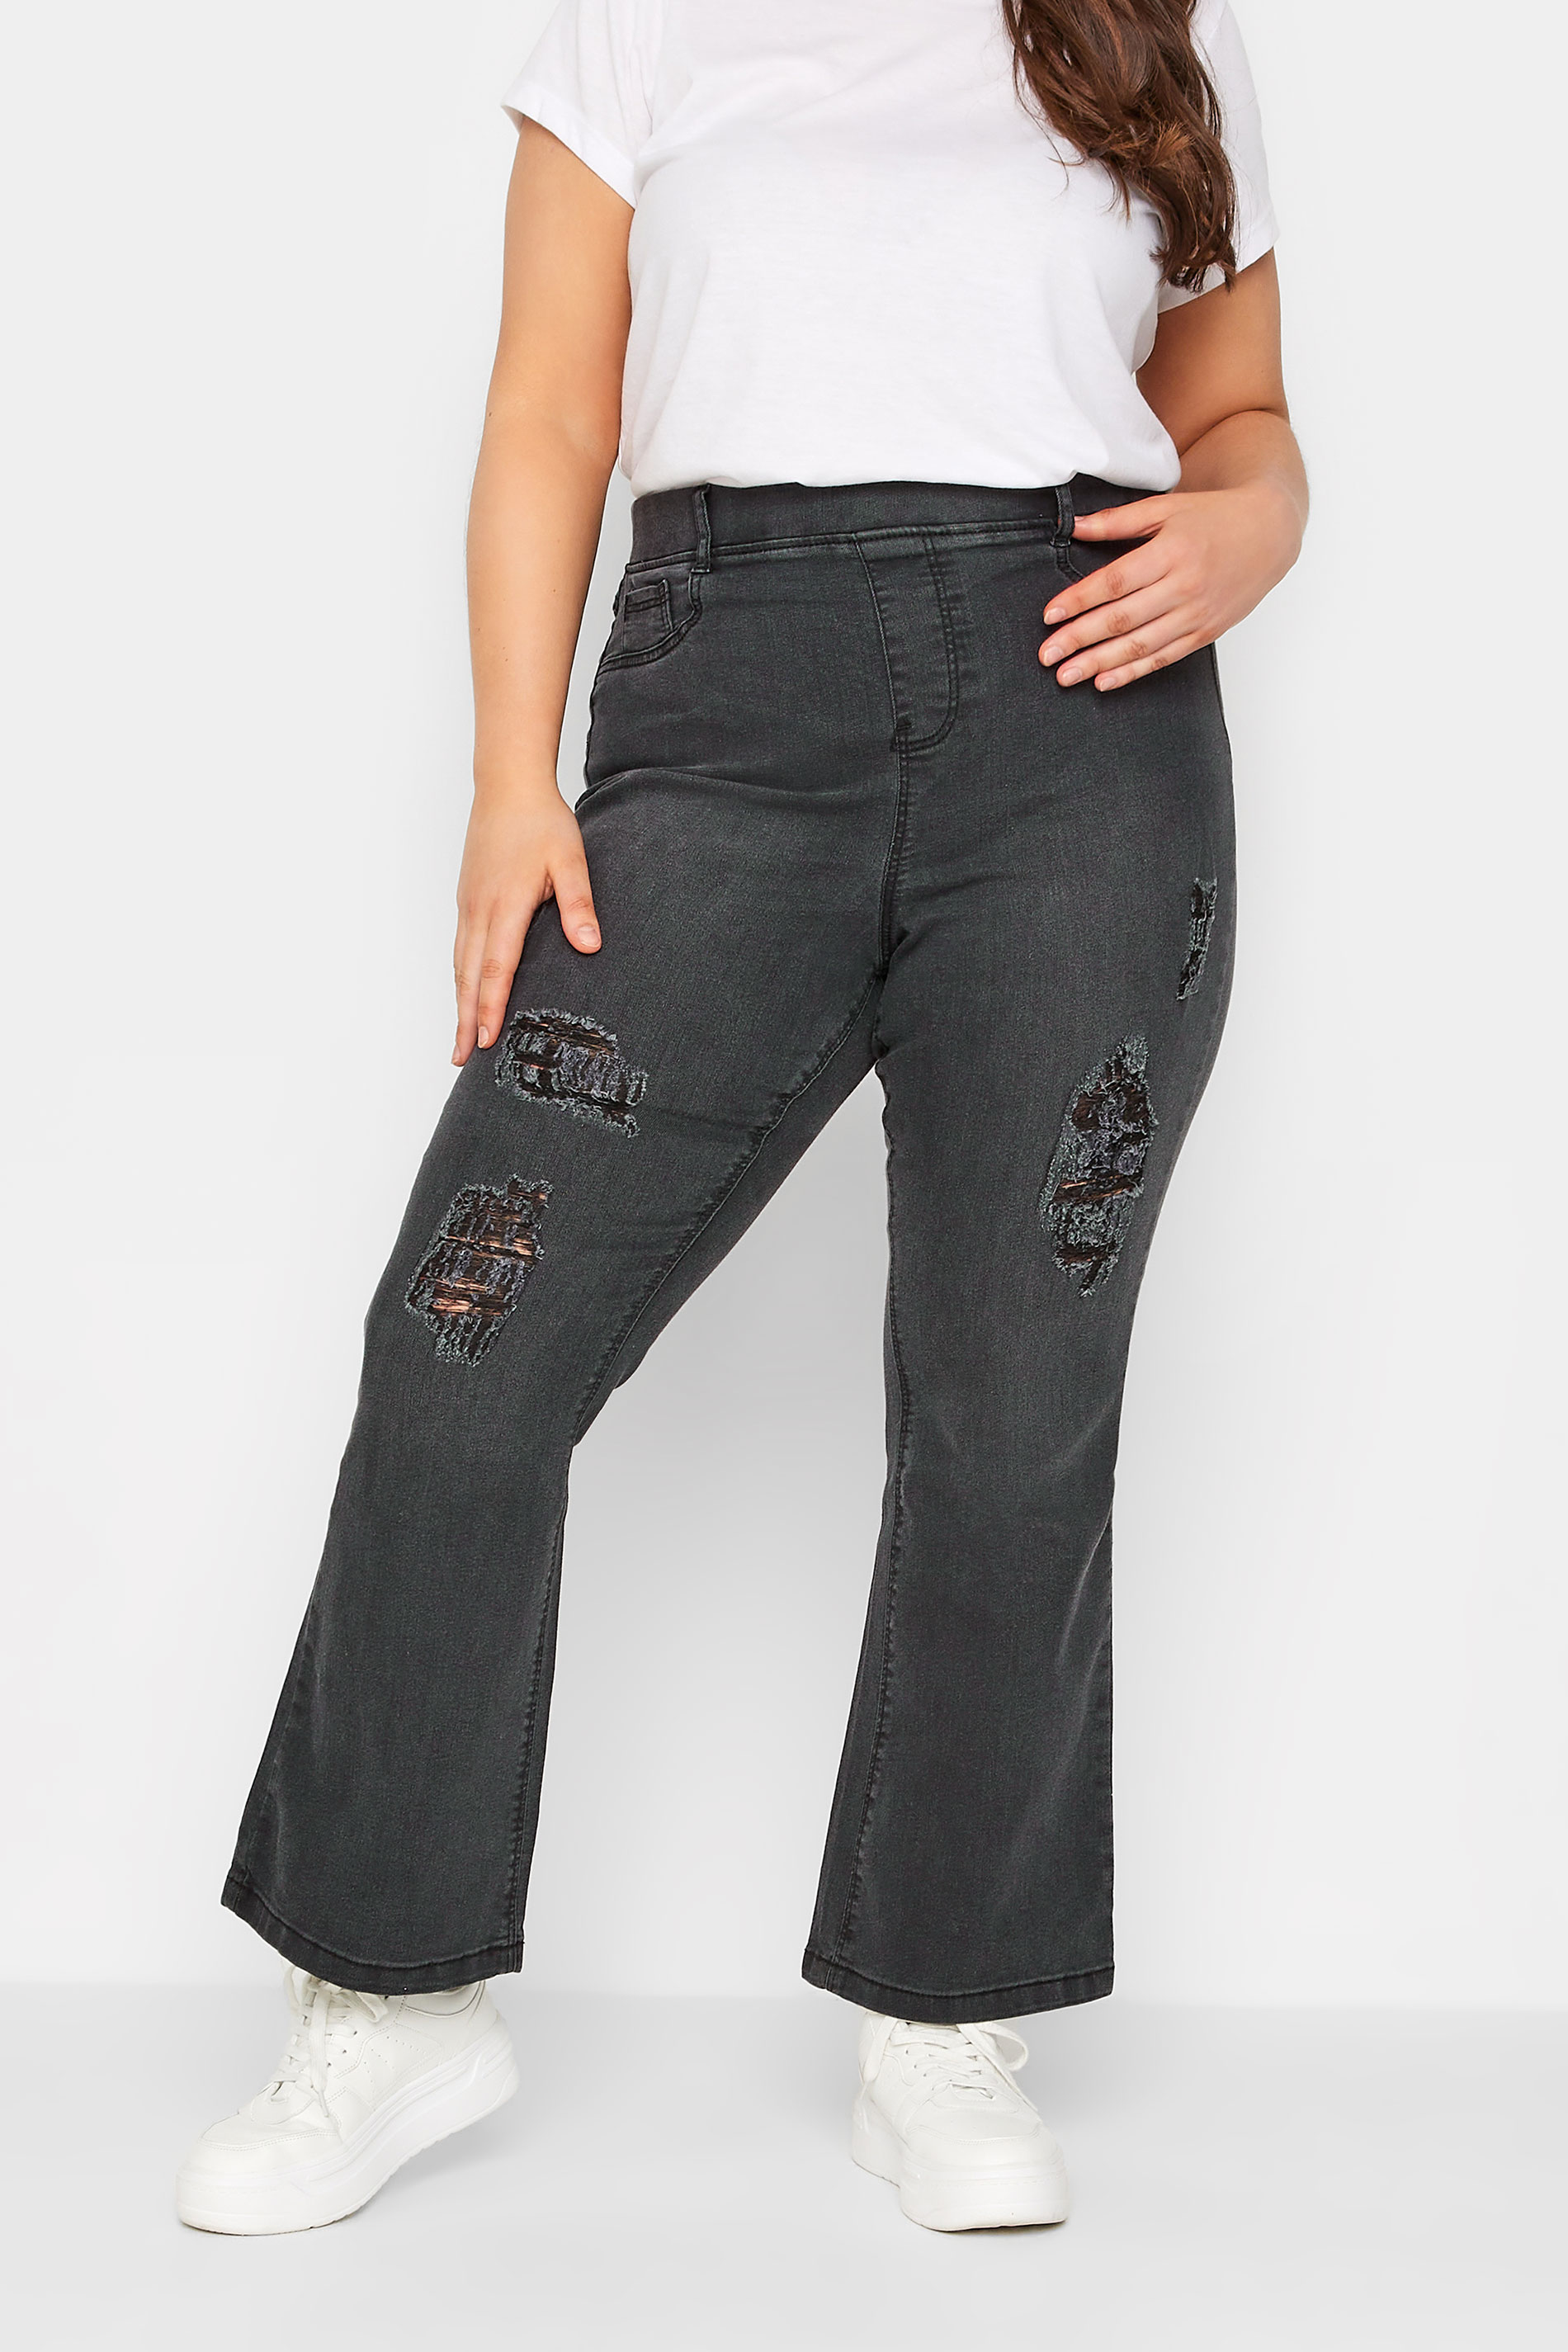 Plus Size Pull On Bootcut Jeans Discounted Clearance